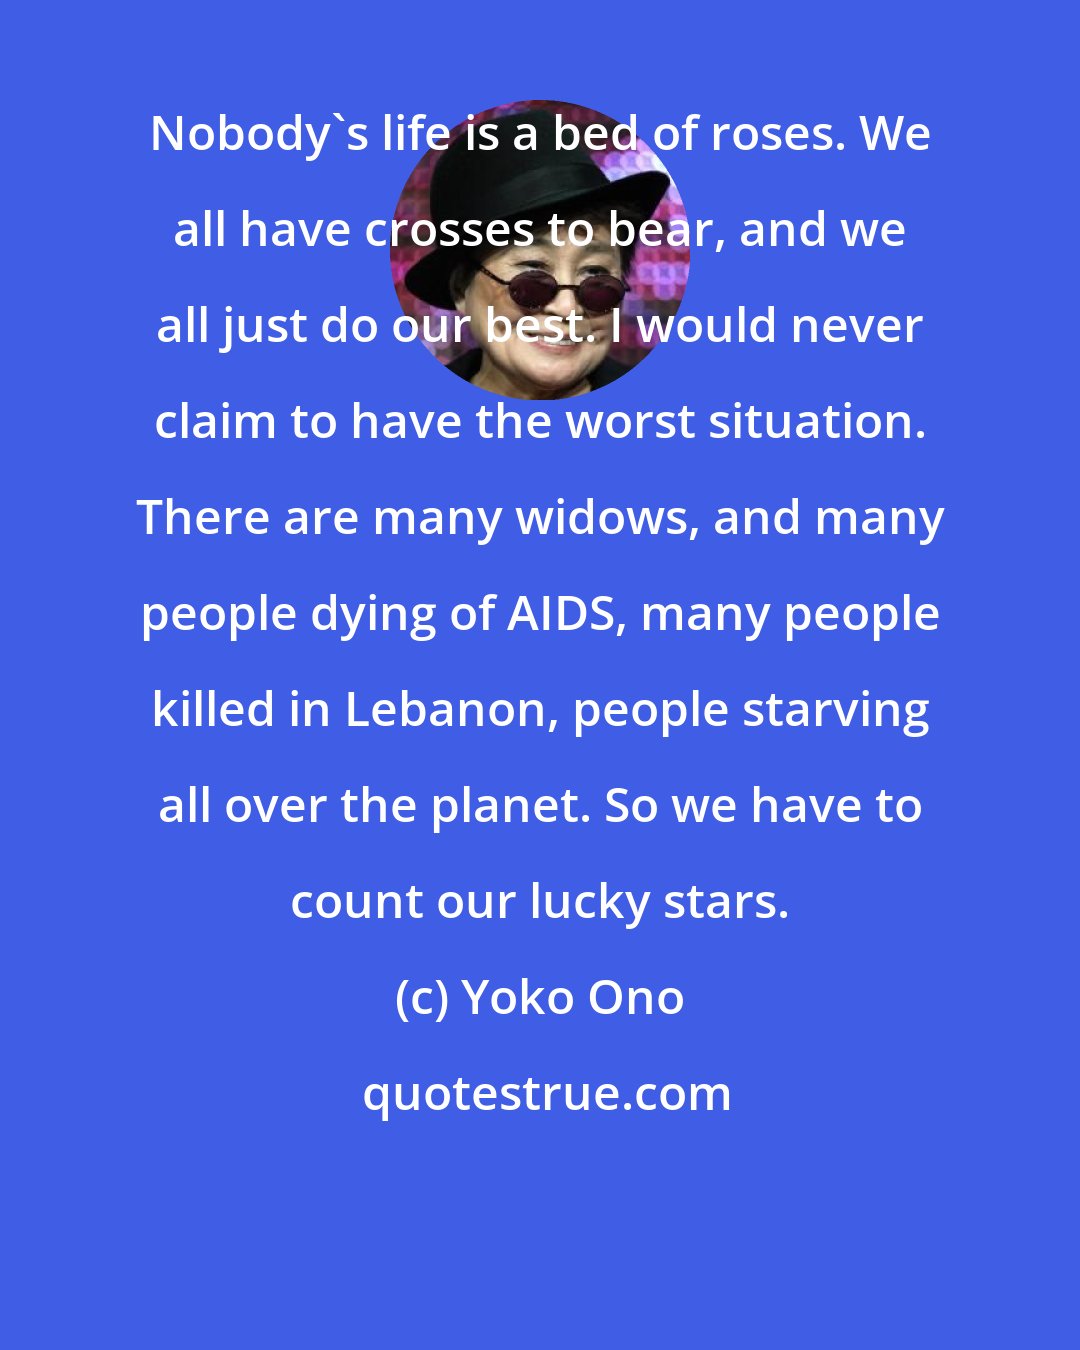 Yoko Ono: Nobody's life is a bed of roses. We all have crosses to bear, and we all just do our best. I would never claim to have the worst situation. There are many widows, and many people dying of AIDS, many people killed in Lebanon, people starving all over the planet. So we have to count our lucky stars.